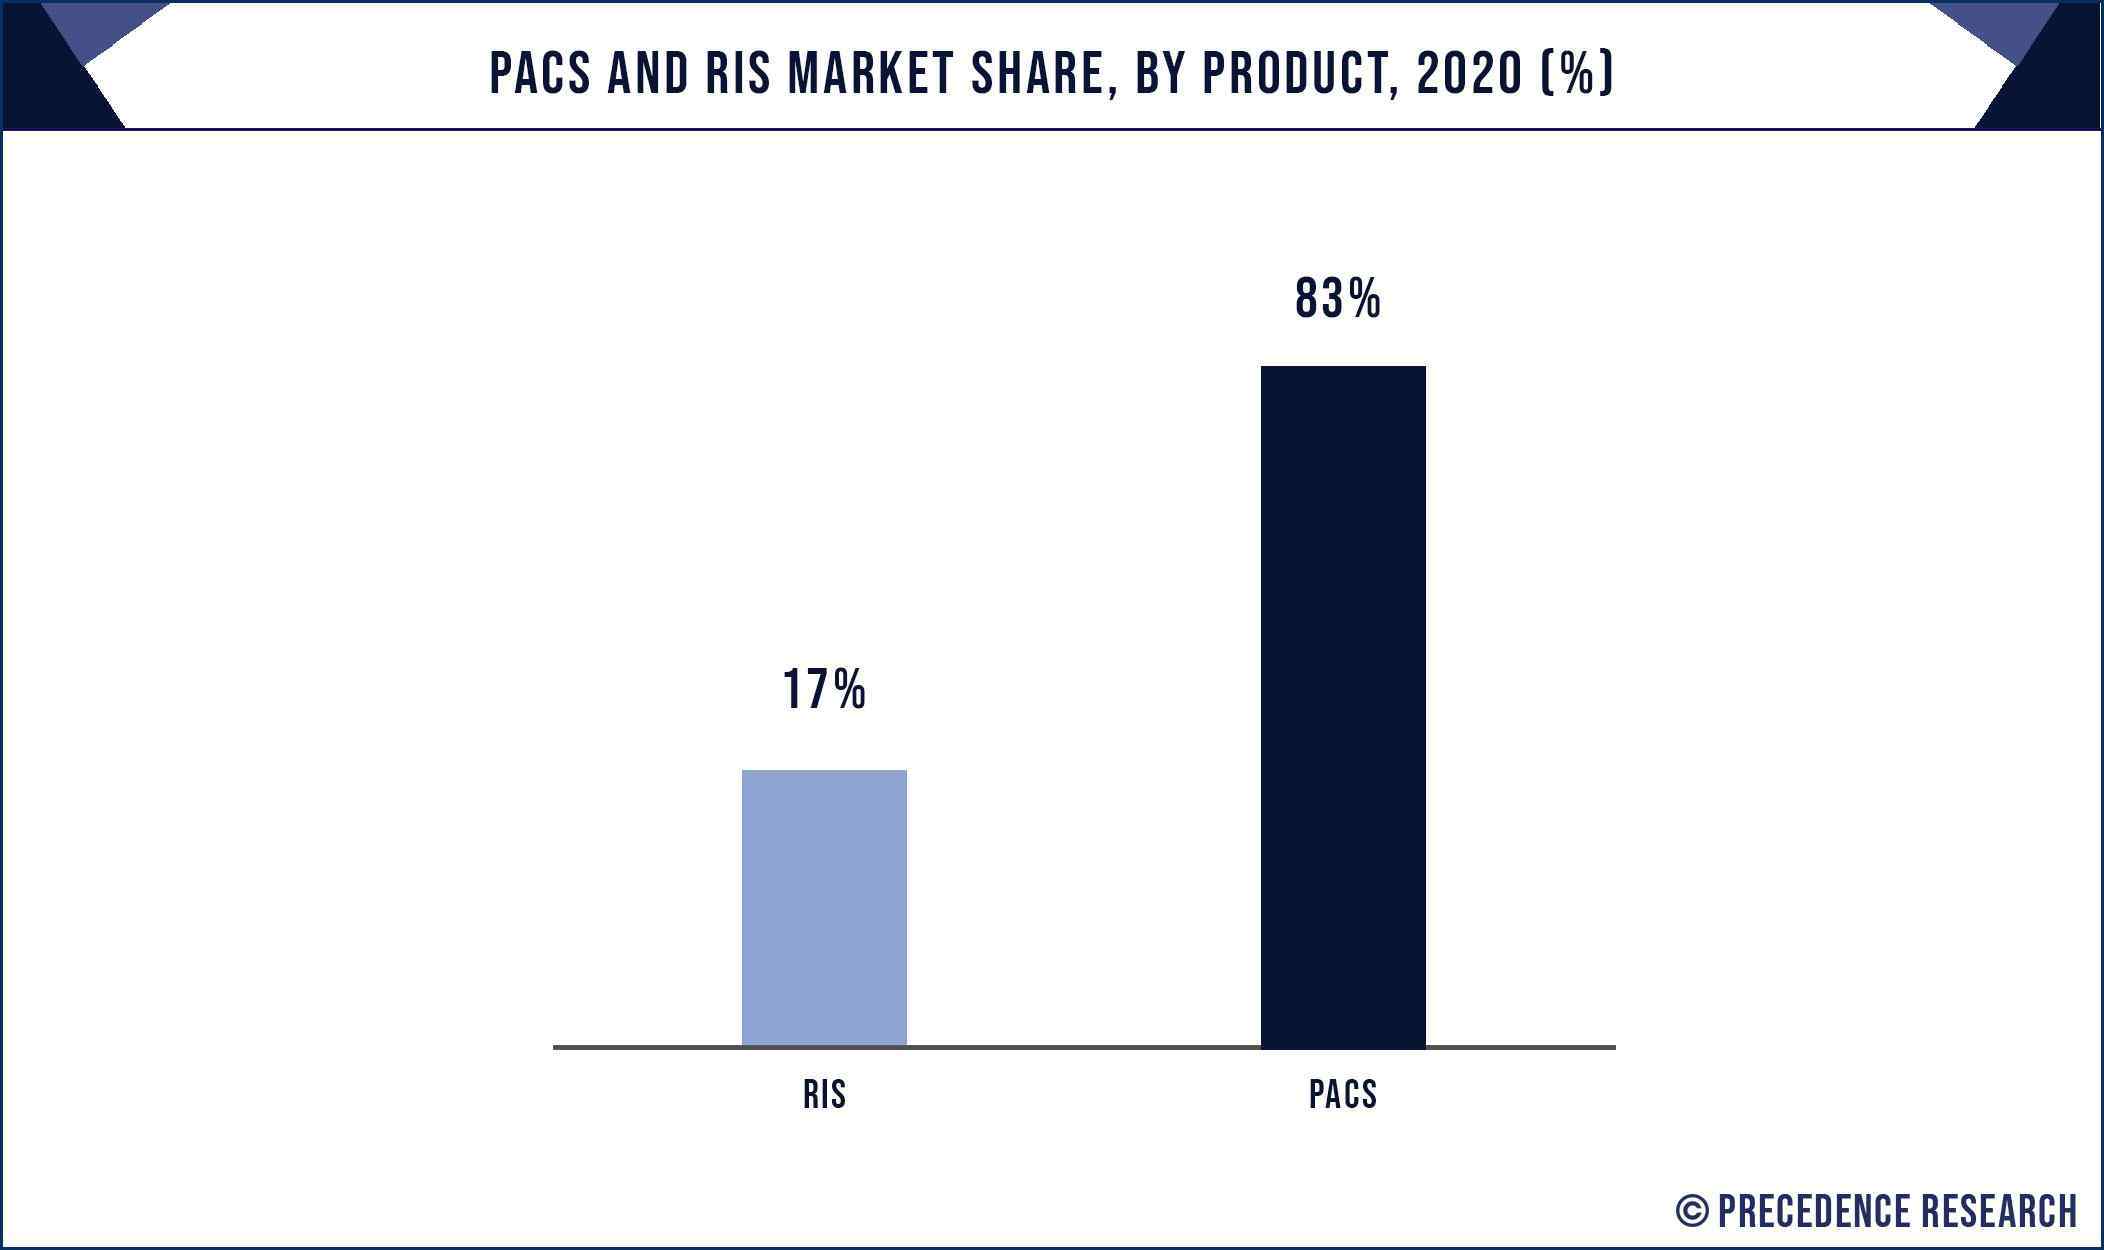 PACS and RIS Market Share, By Product, 2020 (%)